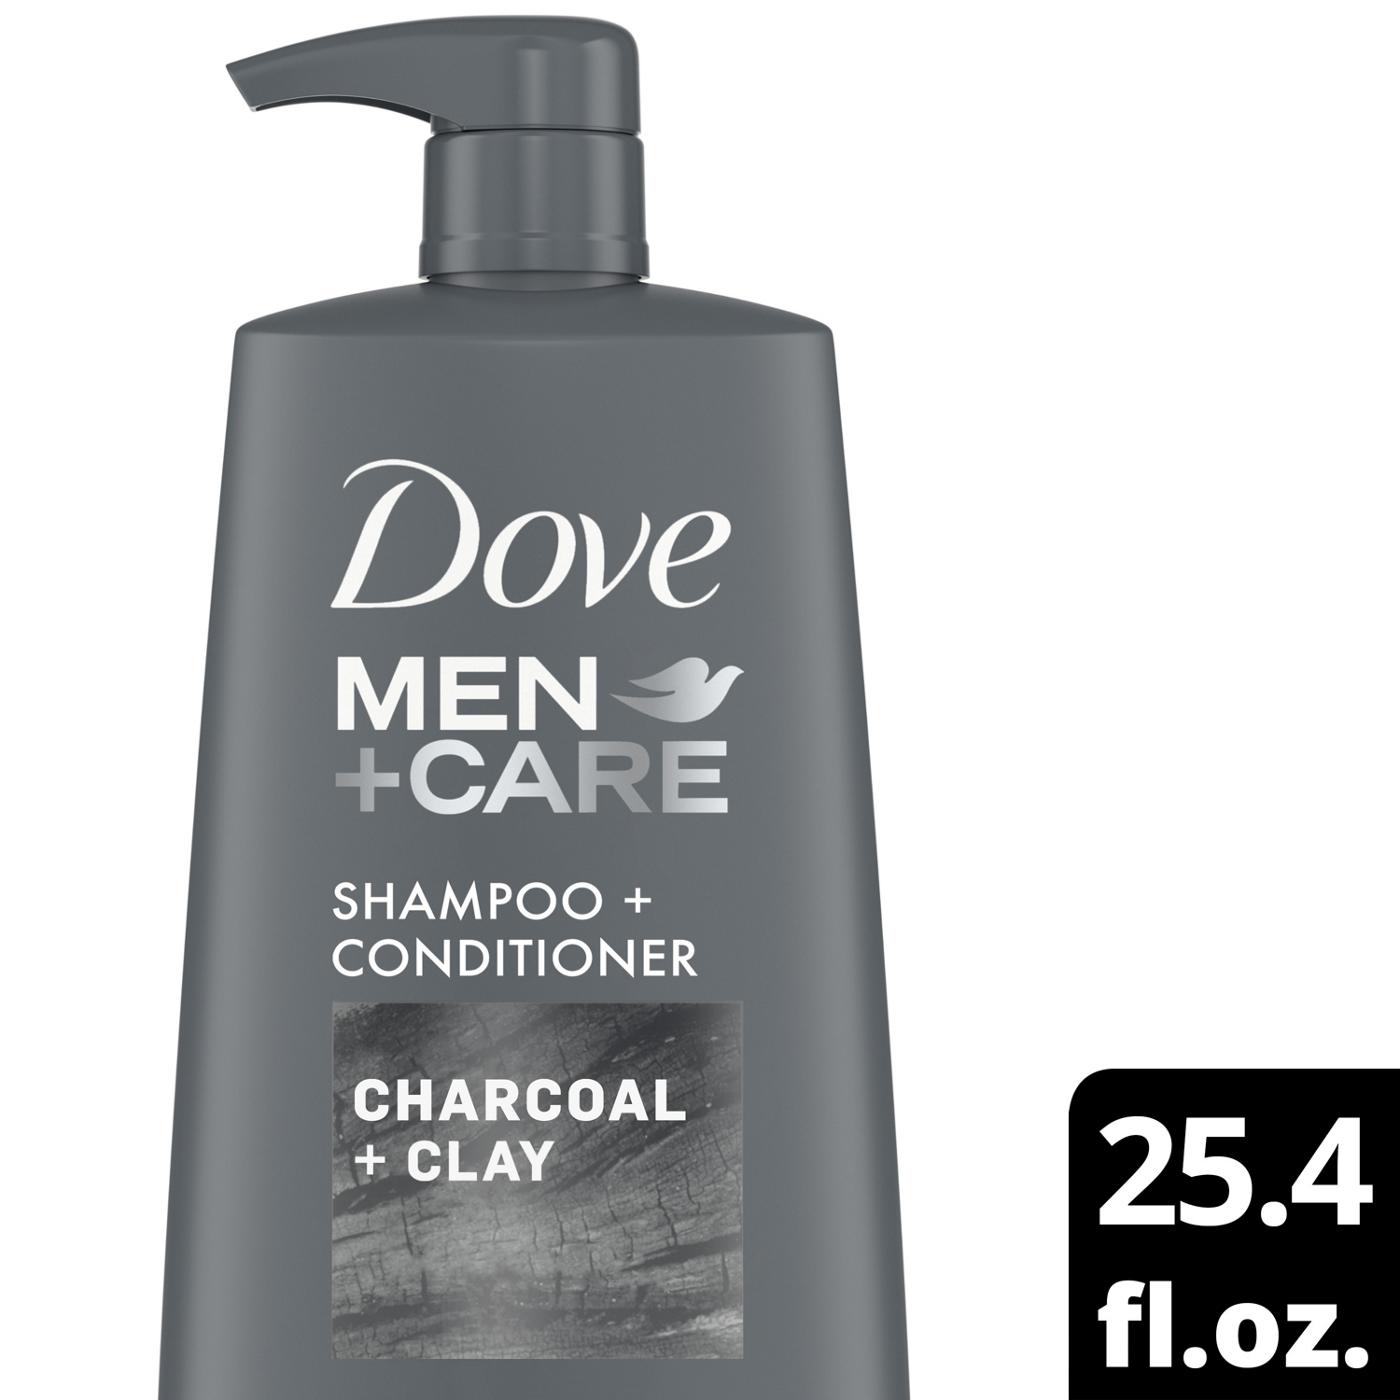 Dove Men+Care Shampoo - Charcoal + Clay; image 5 of 5